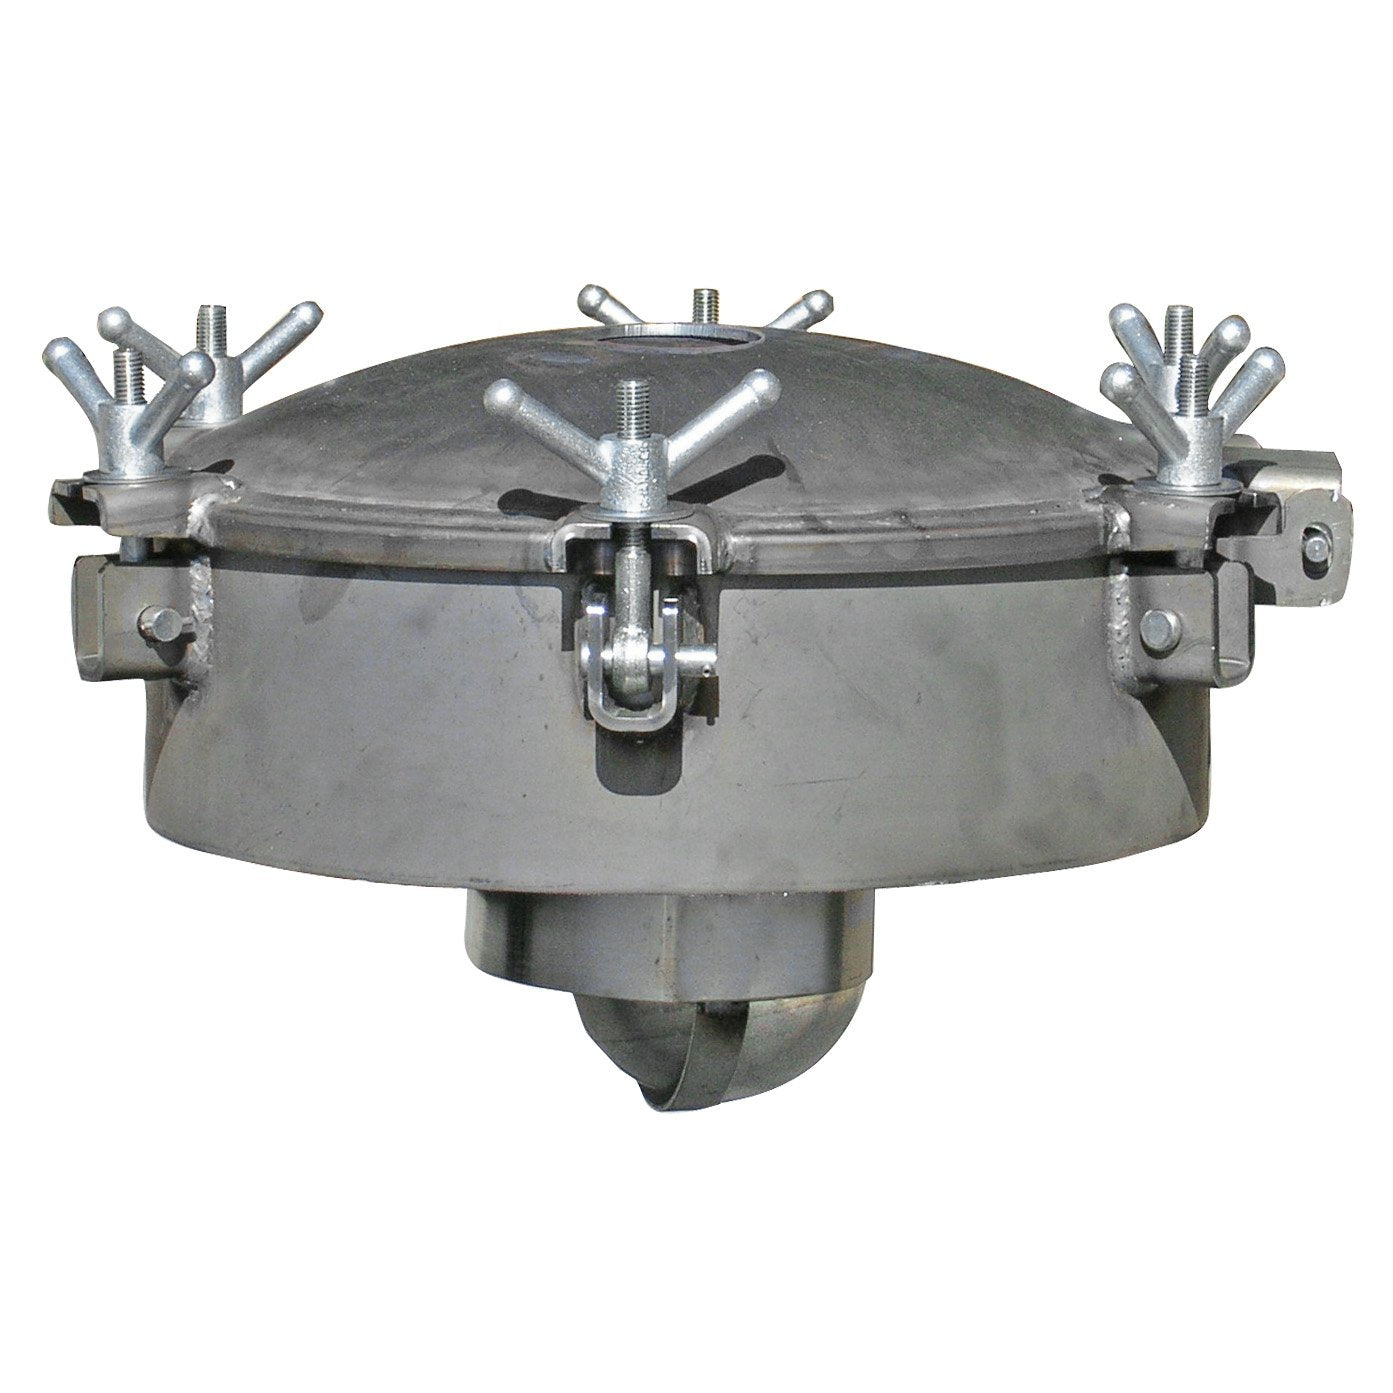 20" Steel Primary Shutoff, 6" Steel Neck   3" Opening with 470 CFM  4" Opening with 595 CFM  6 Standard Wing Nut Assembly  27" W x 17" H